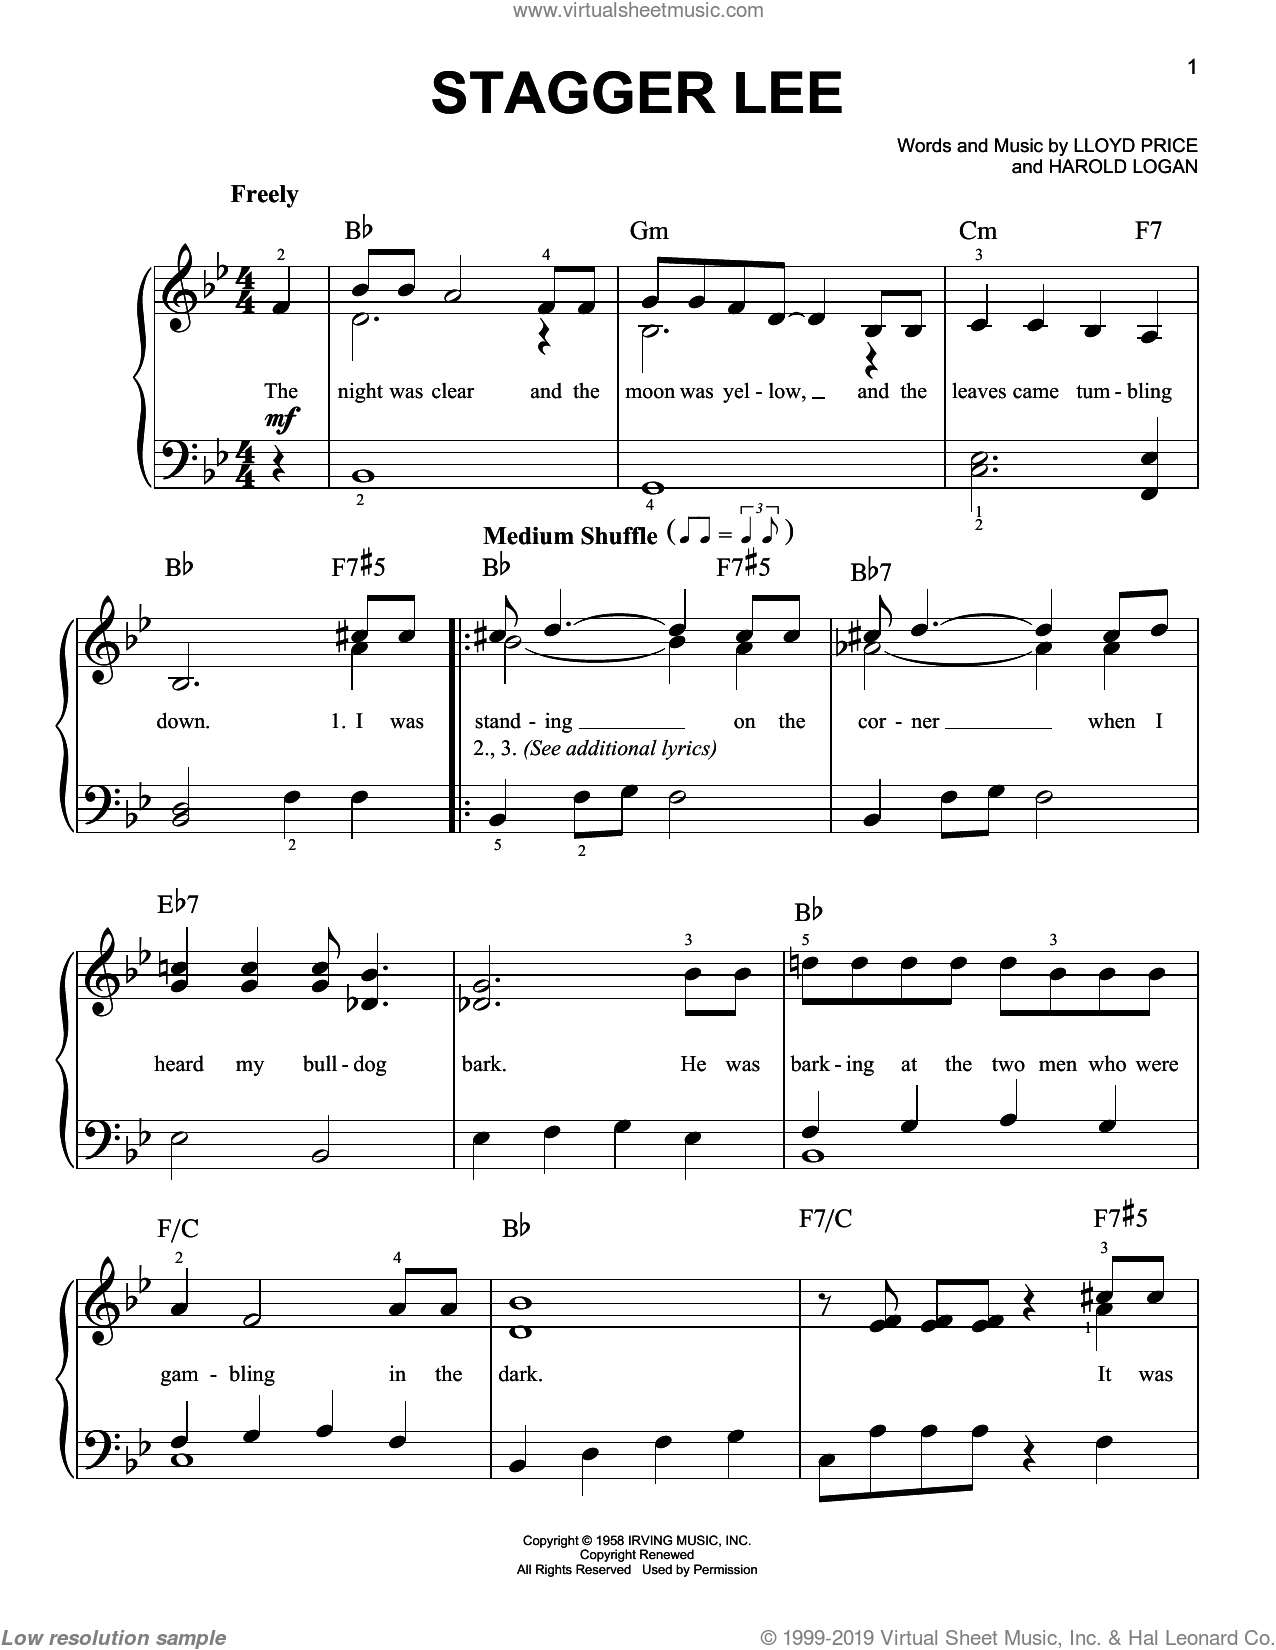 Stagger Lee sheet music for piano solo (PDF-interactive)